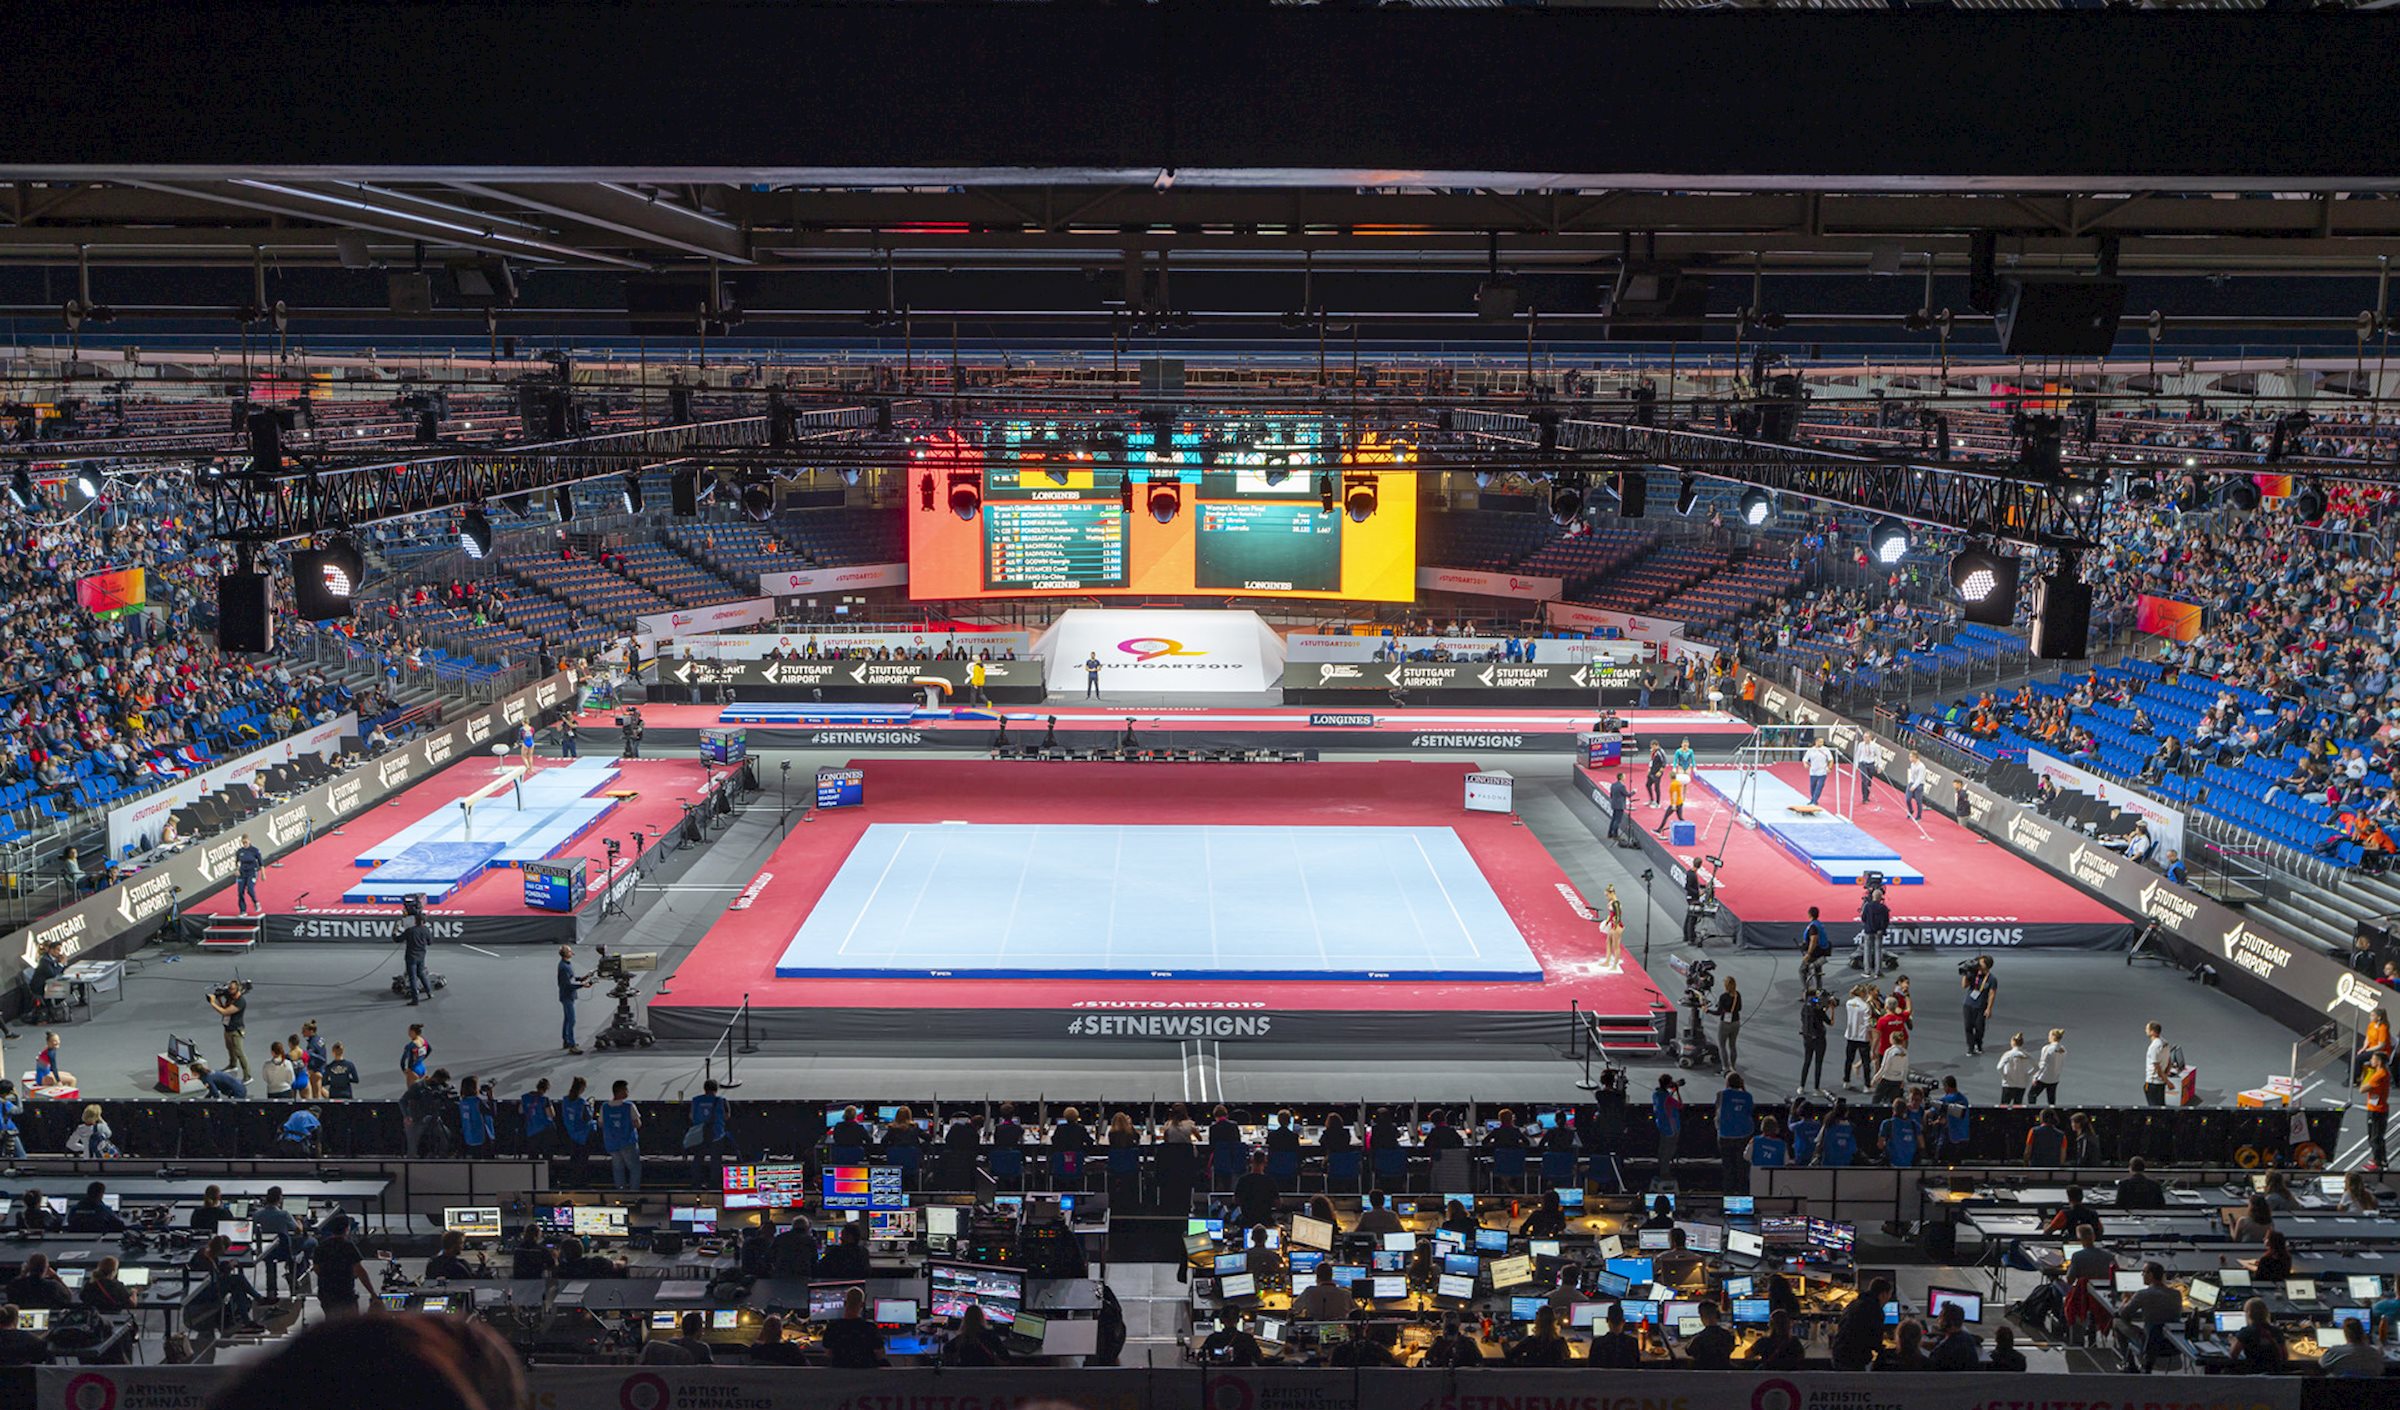 PRG was present with a 40-man crew and responsible for rigging, video, lighting and audio technology supporting the Gymnastics World Championships.